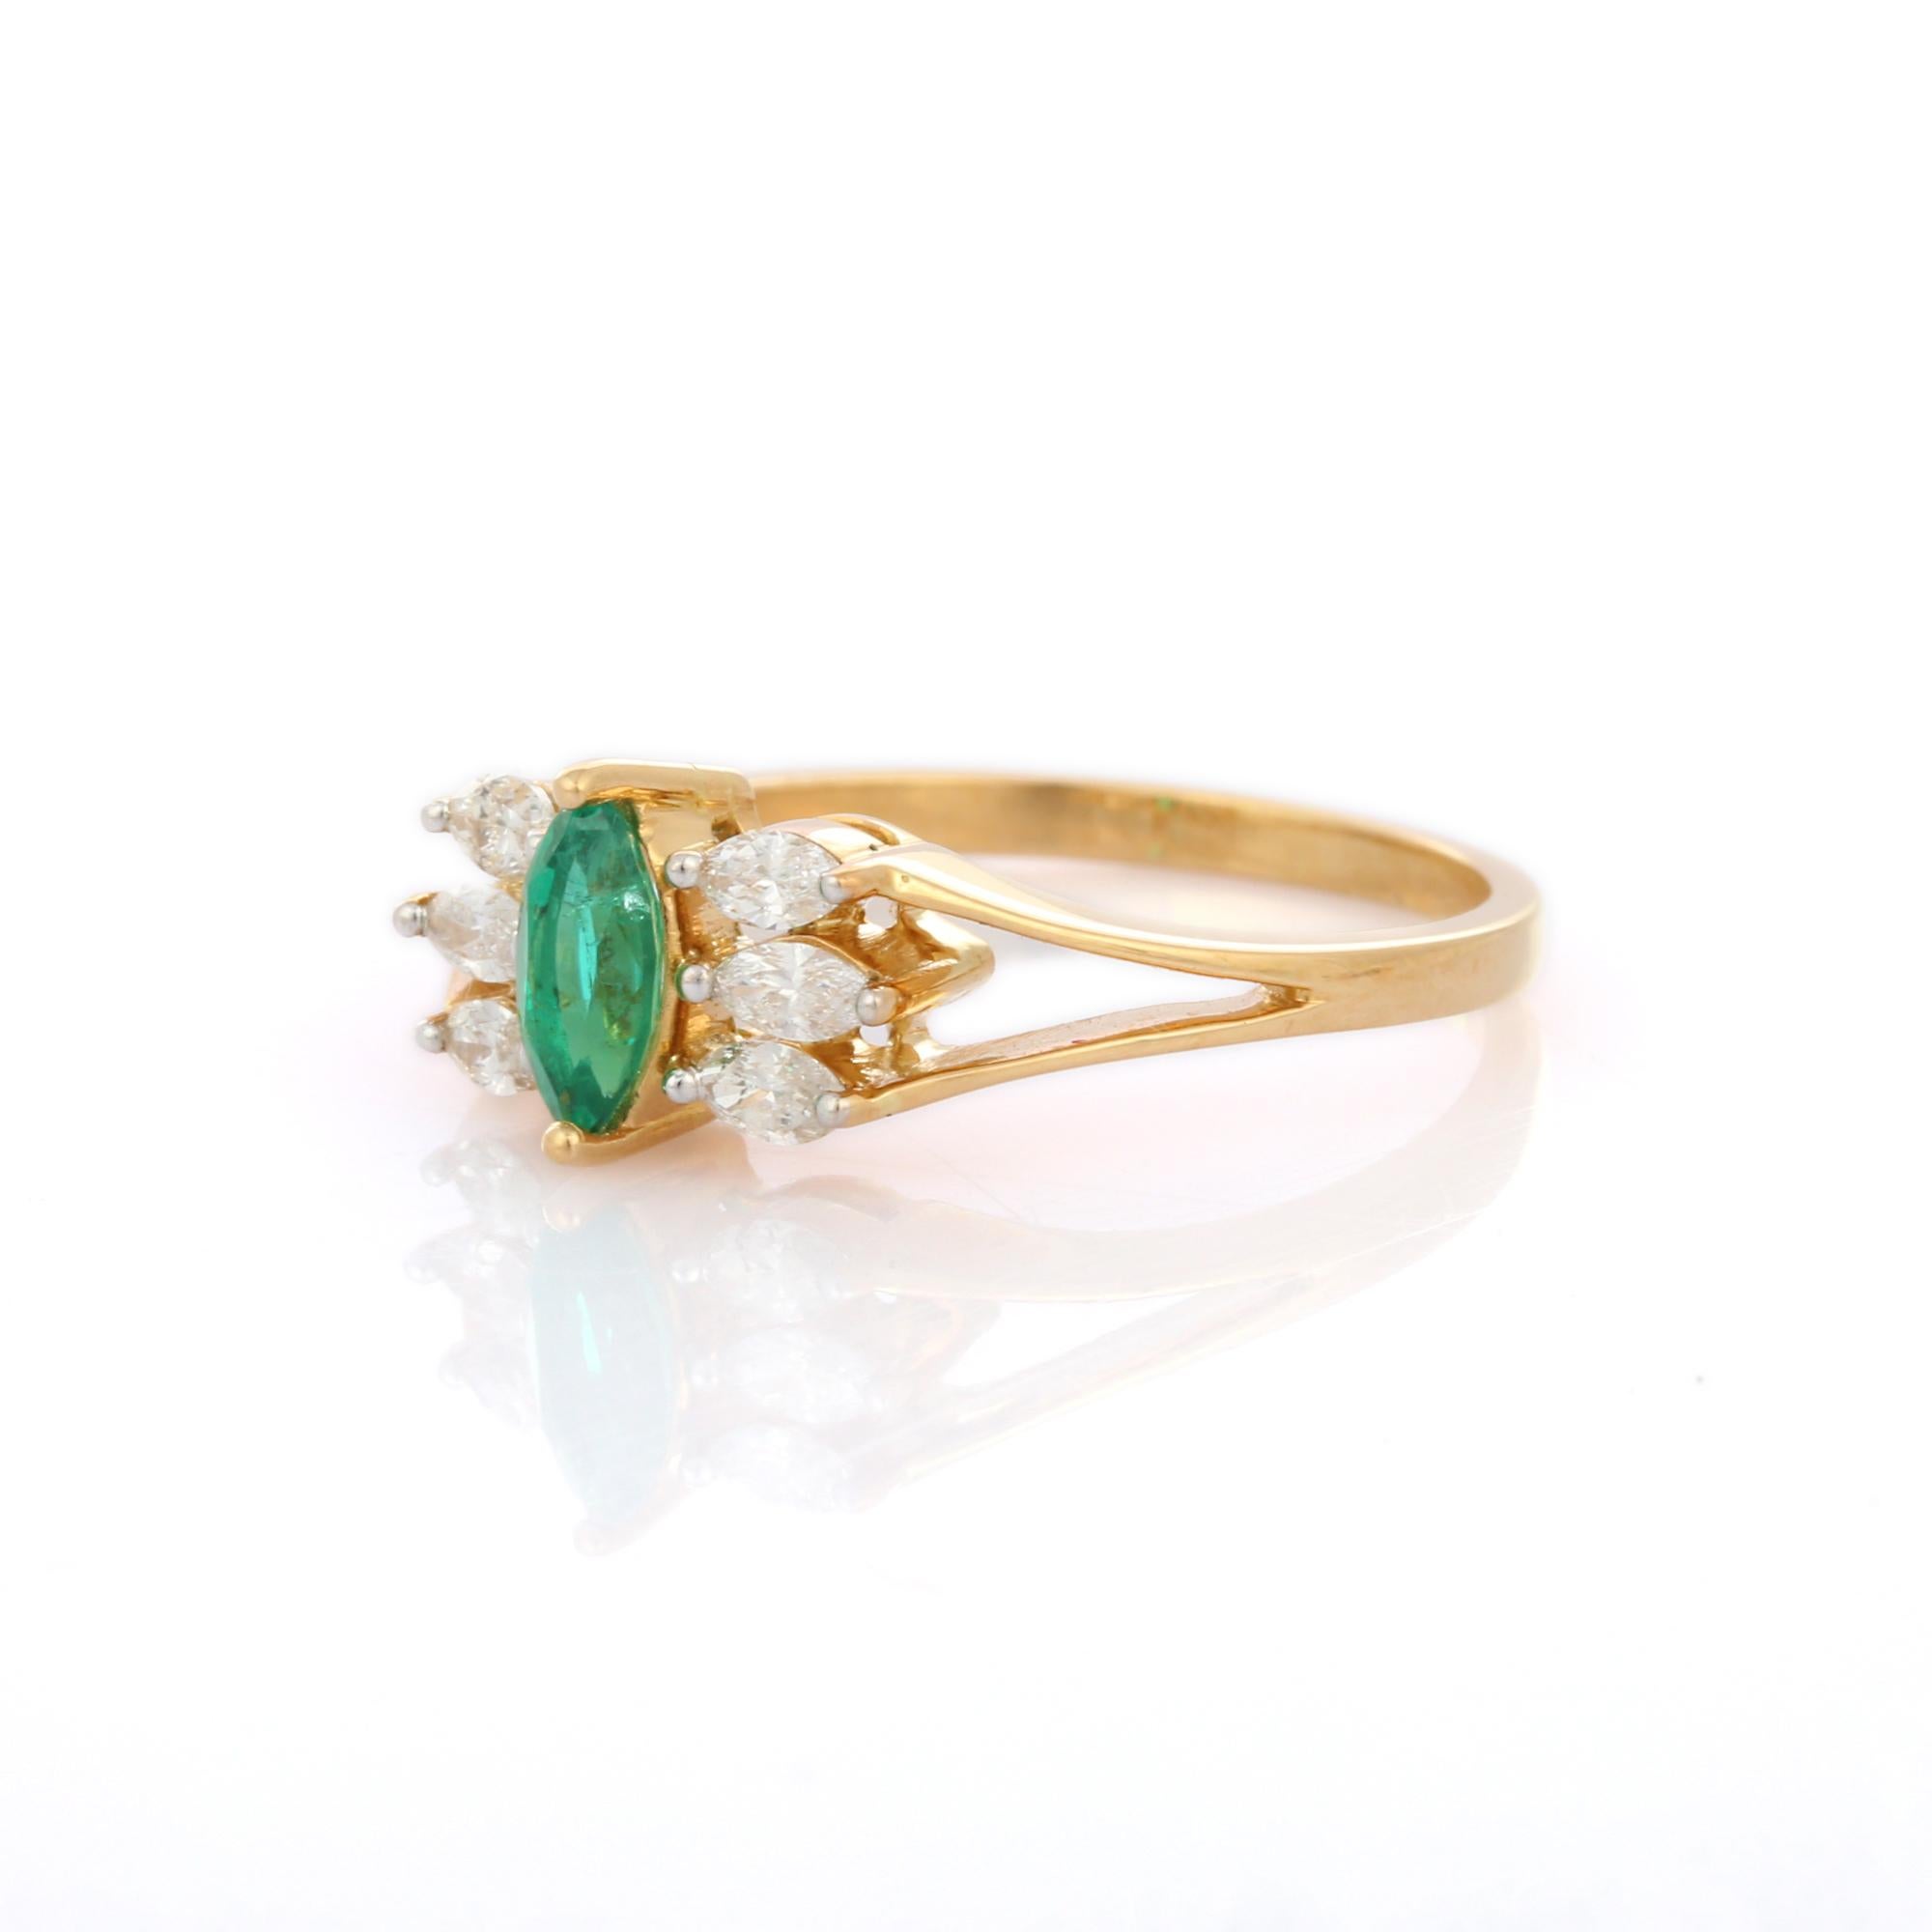 For Sale:  Startling Emerald and Diamond Designer Engagement Ring in 18K Solid Yellow Gold 4